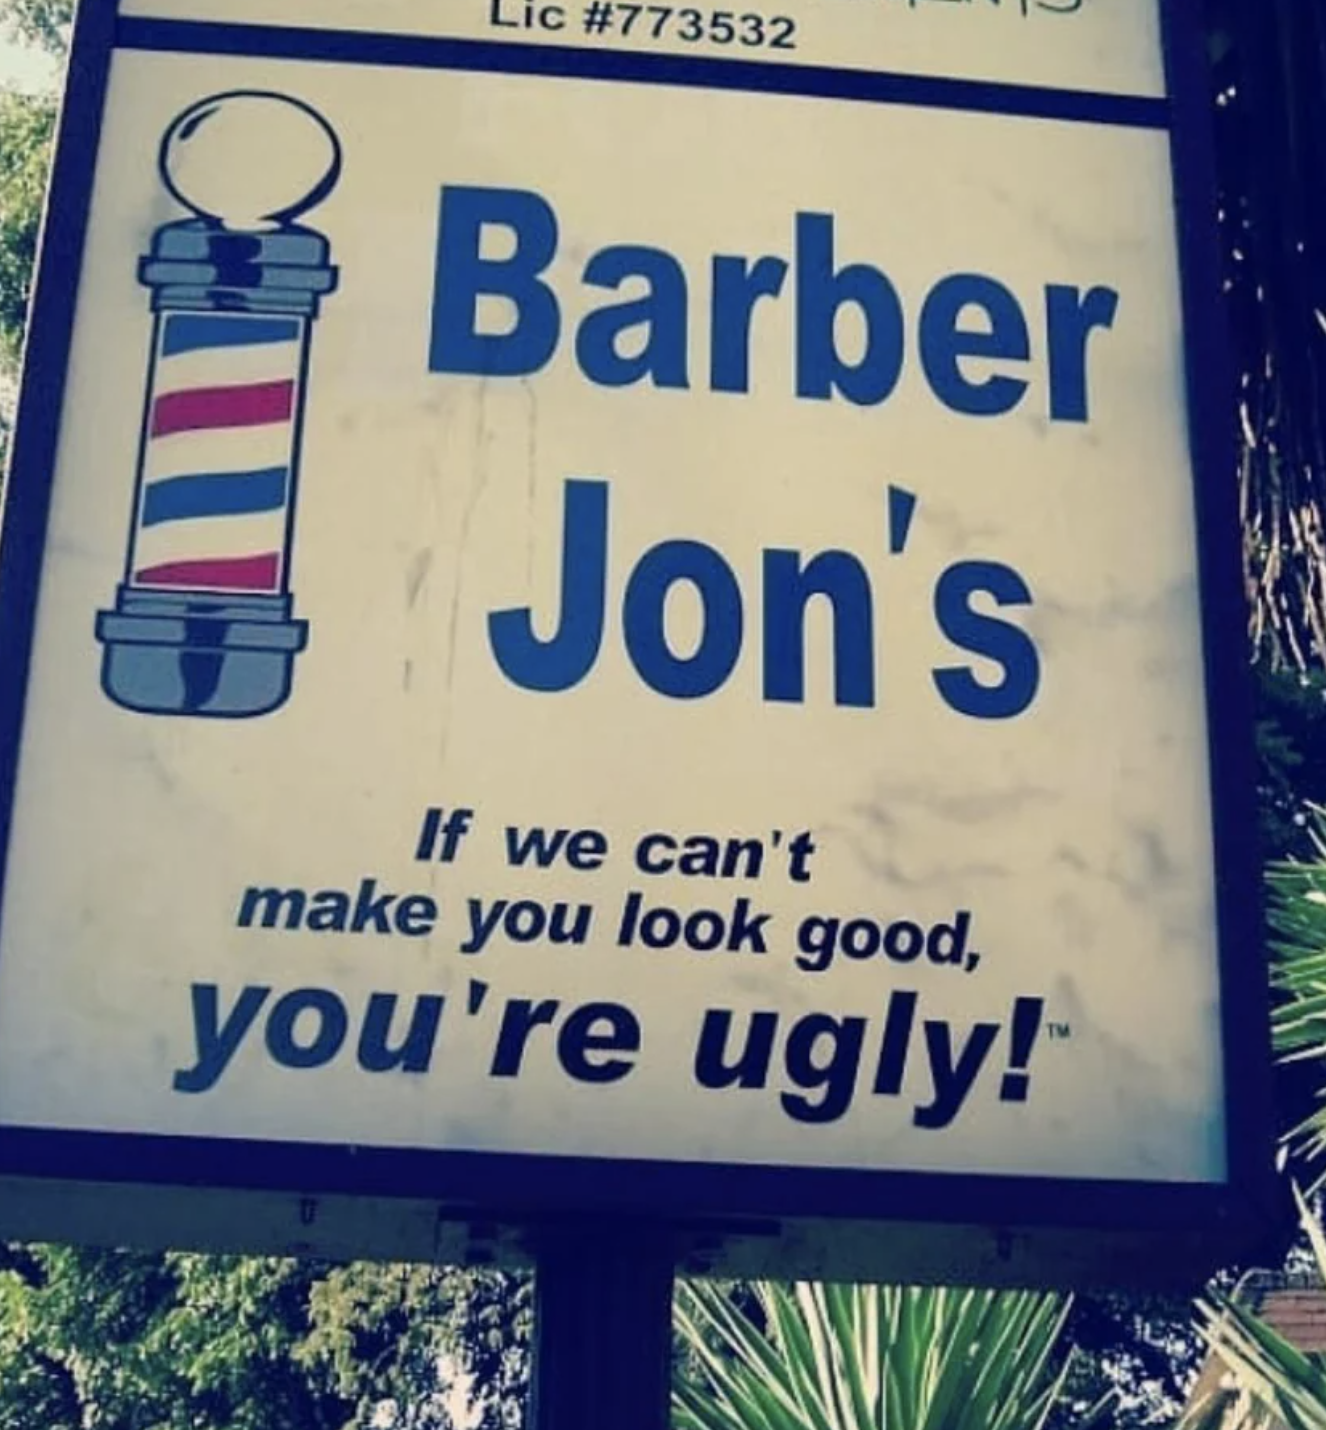 &quot;Barber Jon&#x27;s: If we can&#x27;t make you look good, you&#x27;re ugly!&quot;